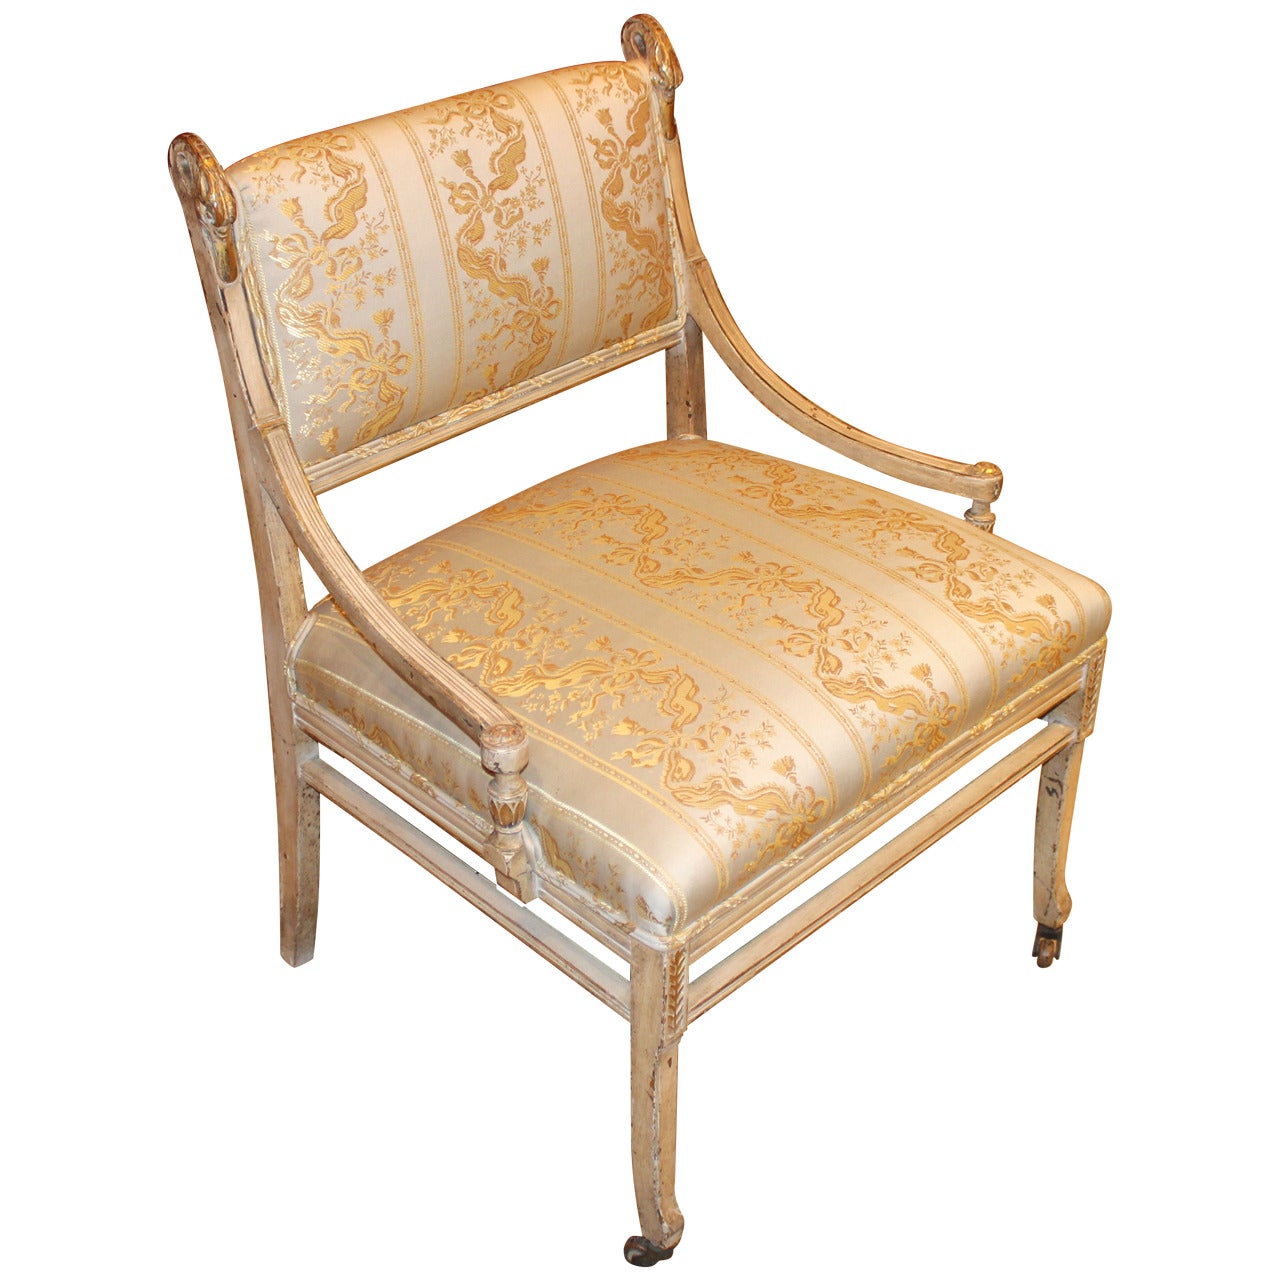 Early 19th c French Style Upholstered Side Chair with Swan Heads